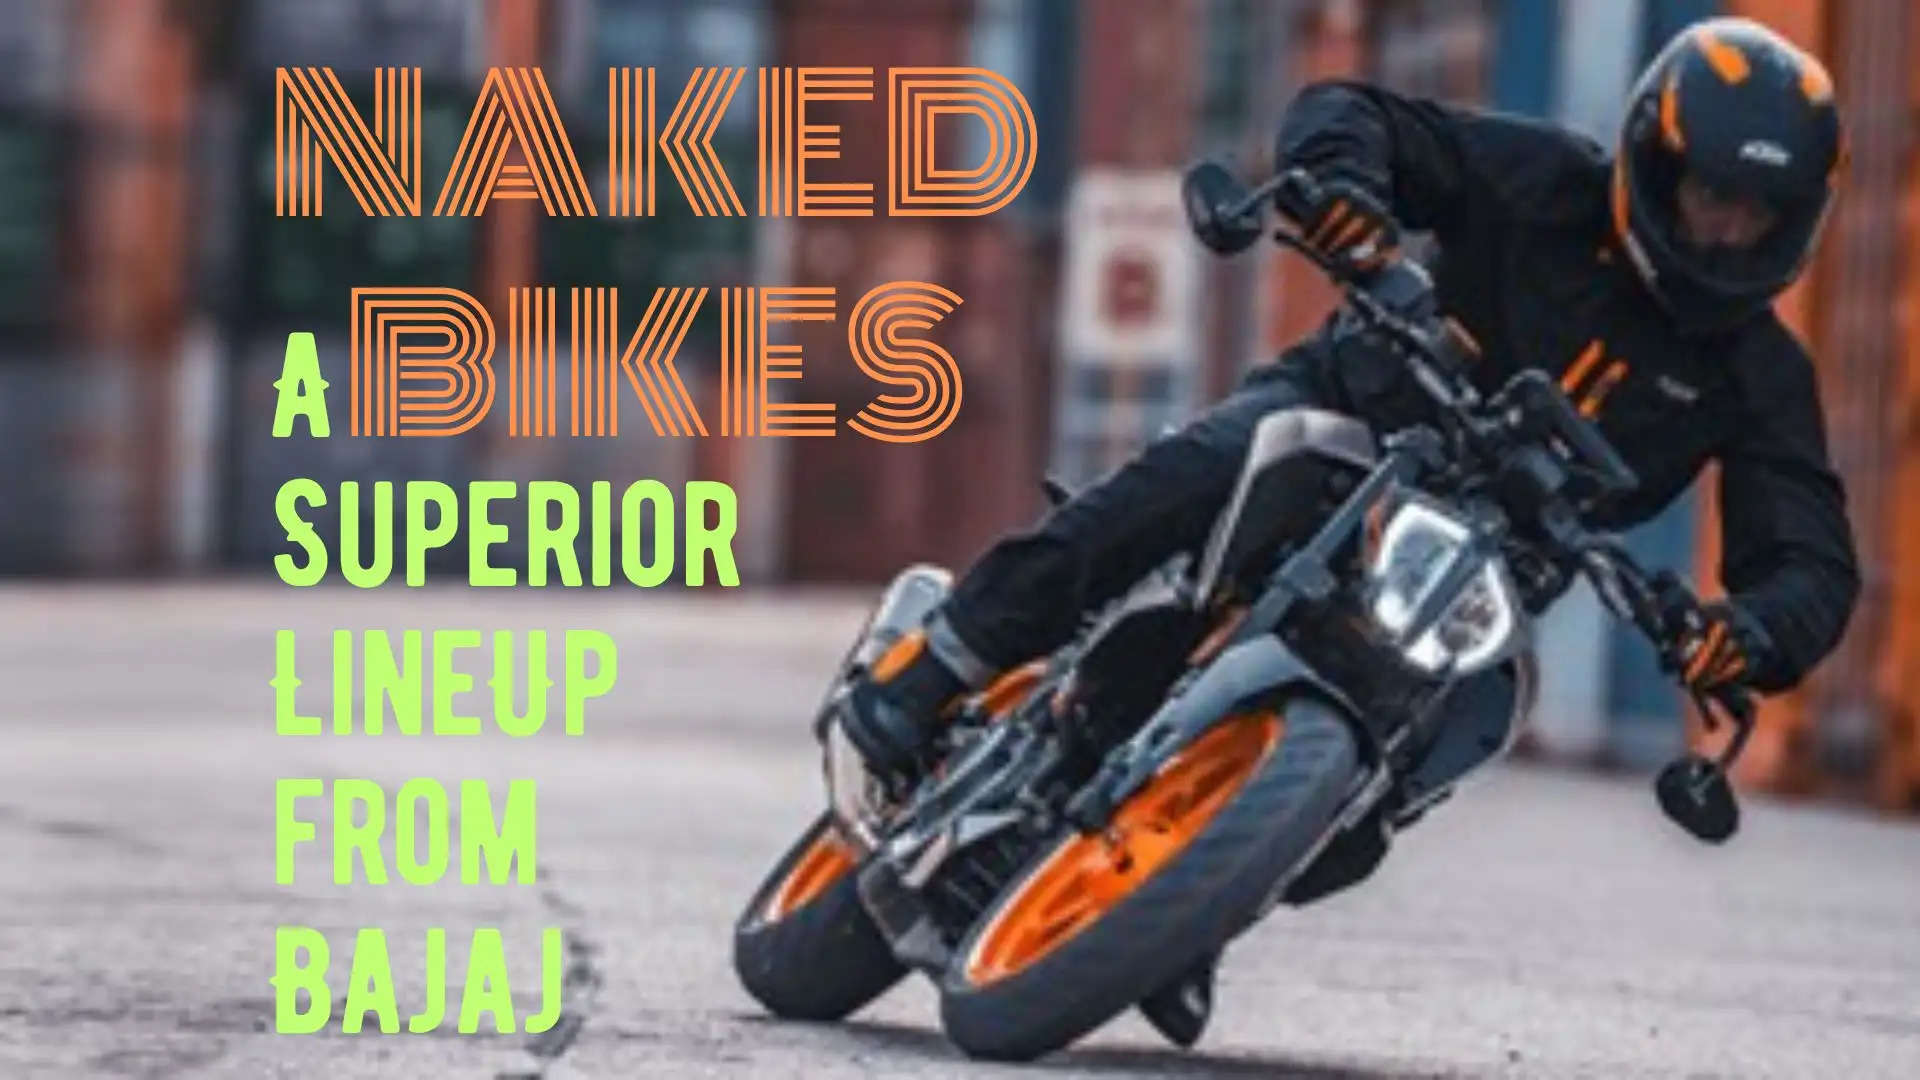 Naked Bikes KTM A Superior Line Up from Bajaj Auto